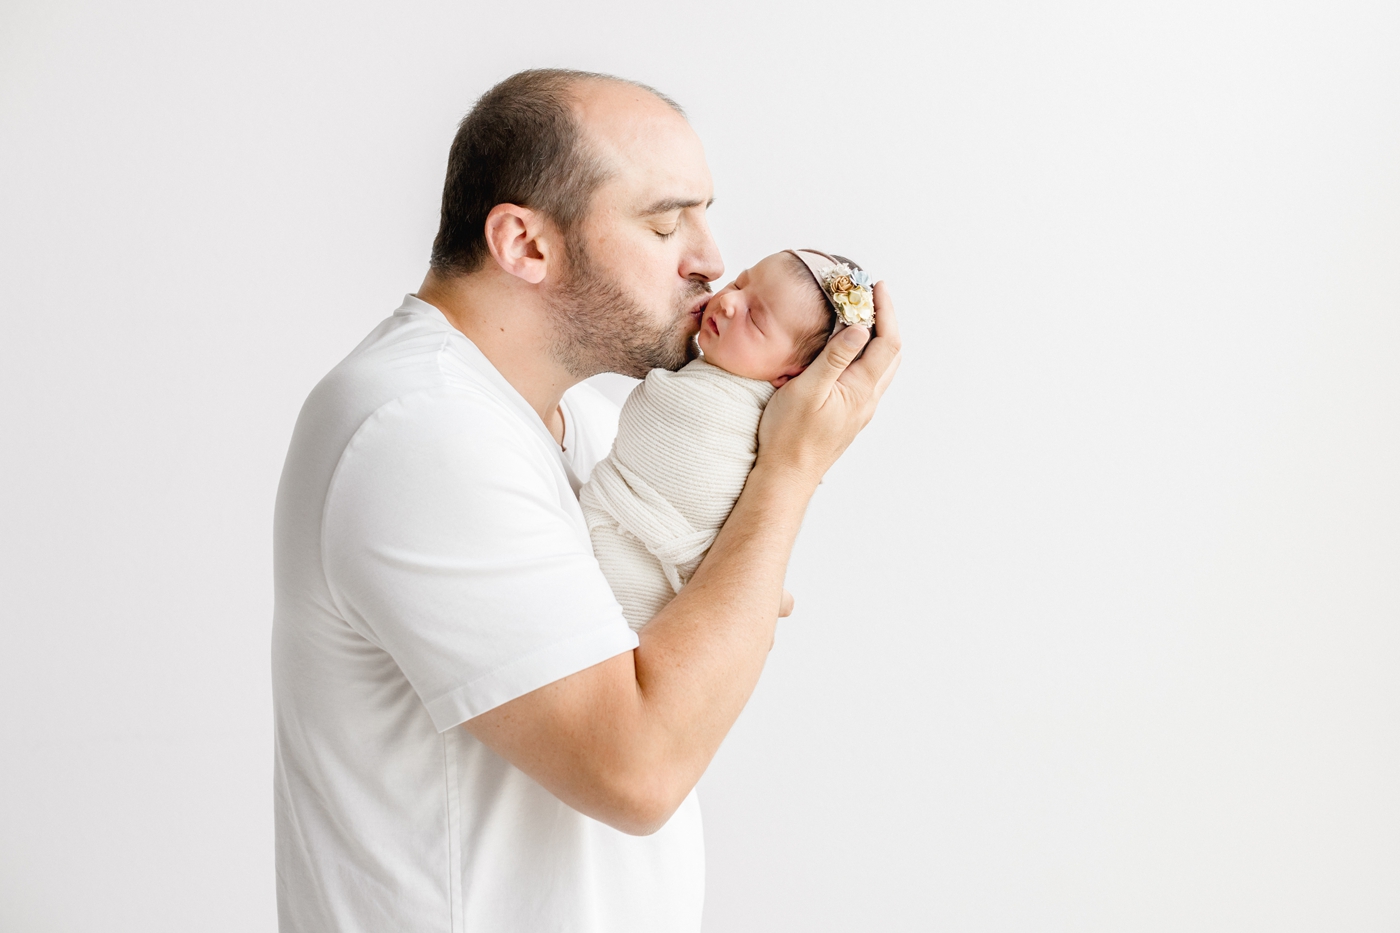 Dad kissing baby girl during newborn session. Photo by Sana Ahmed Photography.